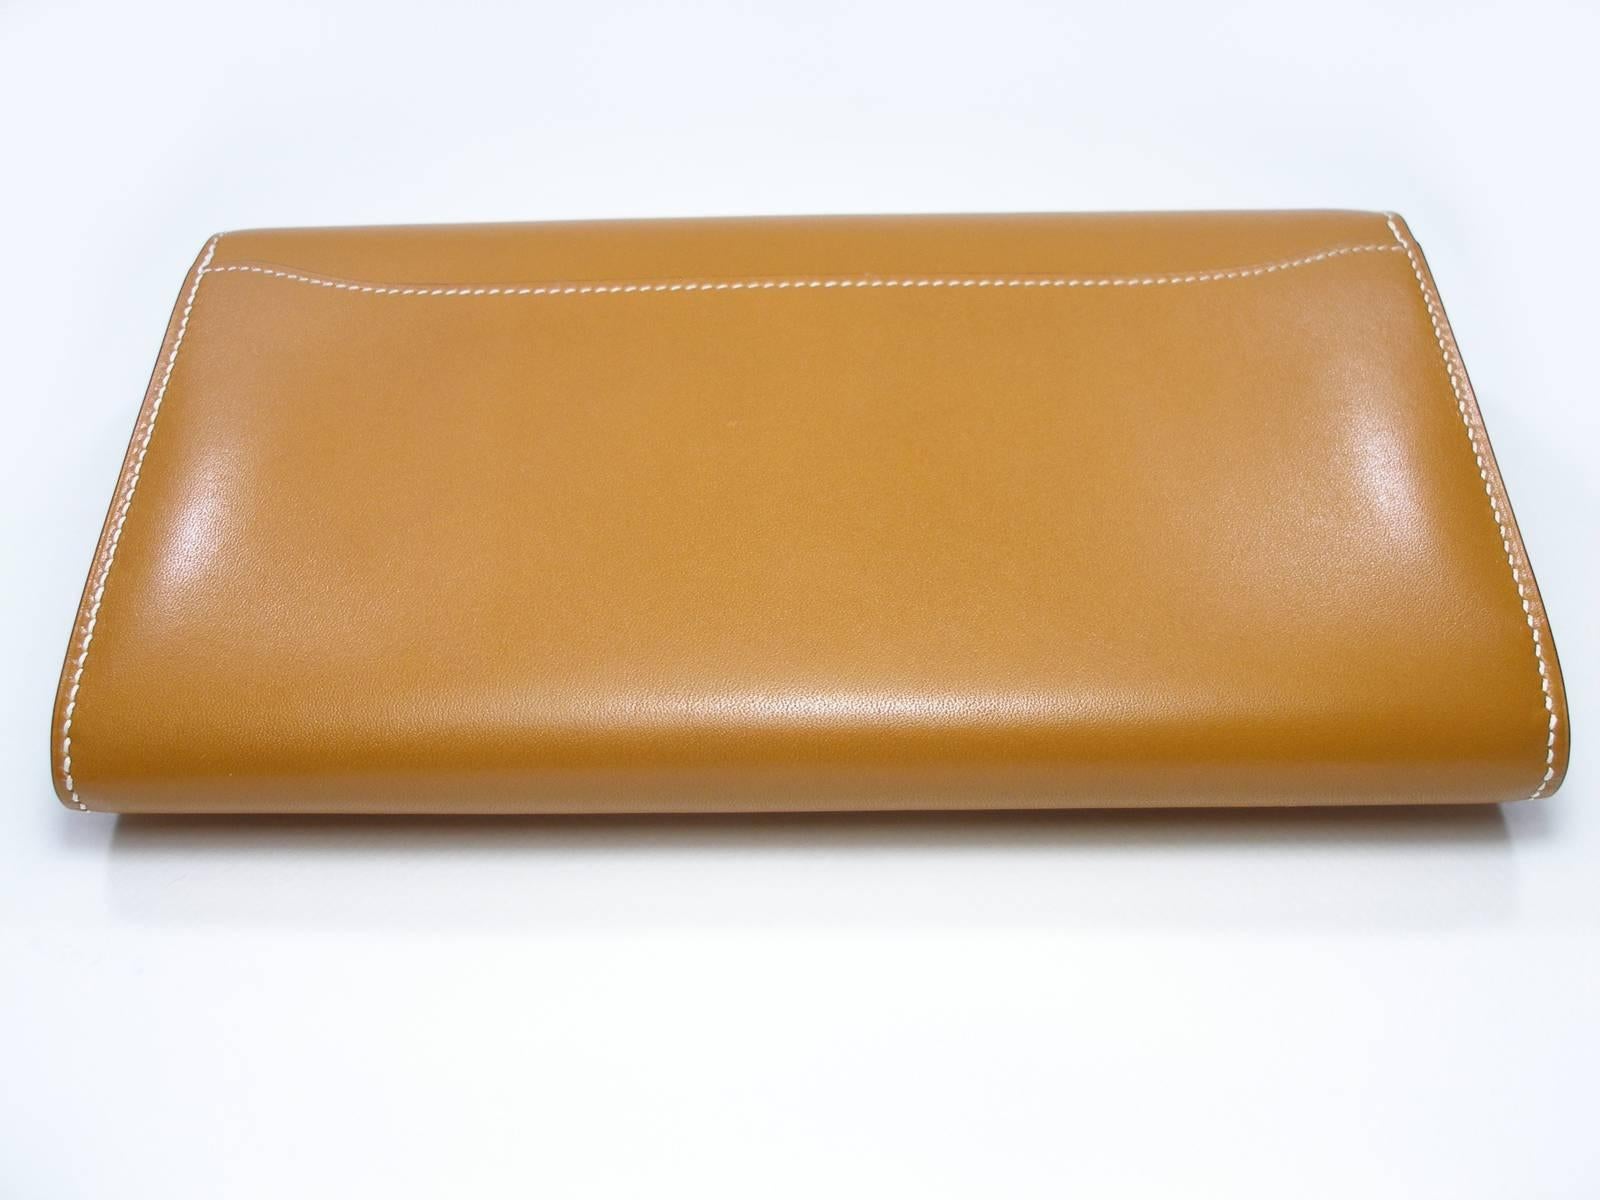 Stunning Constance Clutch Hermés
Leather : veau buttler
Color : naturel
Plastic covered on all hardware
Condition : Never used
Dimensions : 20.5 x 11.5 x 3 cm
Please note for this purchase  : this wallet Constance comes Hermès Private sale reserved